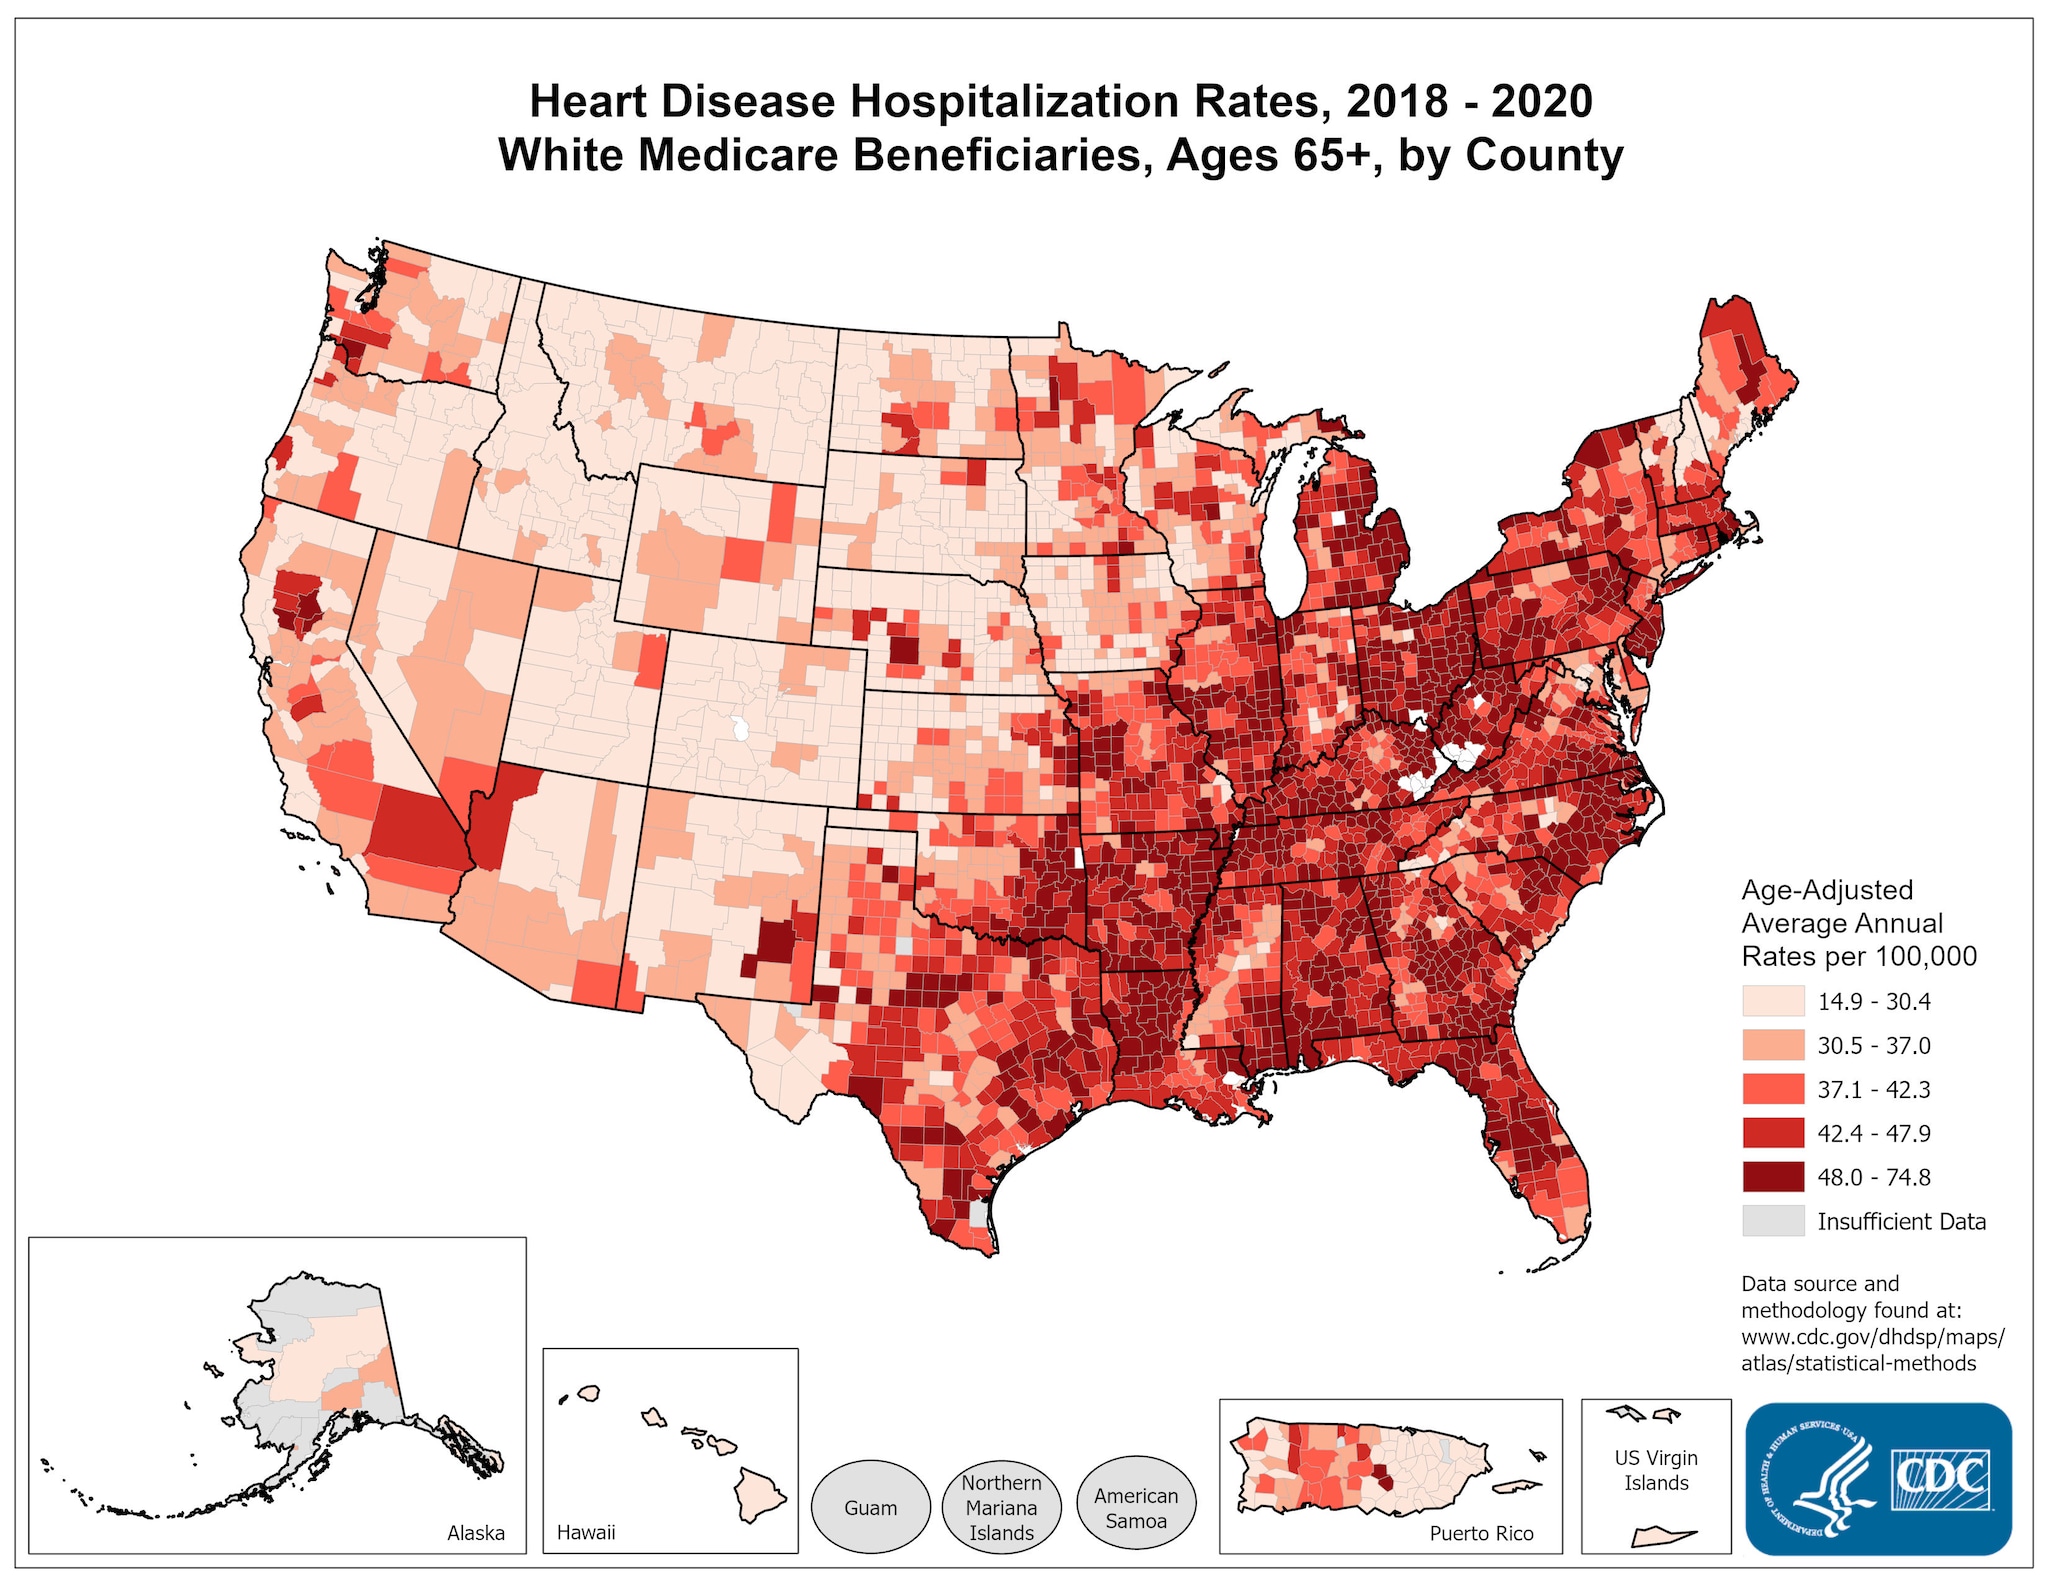 Heart Disease Hospitalization Rates for 2018 through 2020 for Whites Aged 65 Years and Older by County